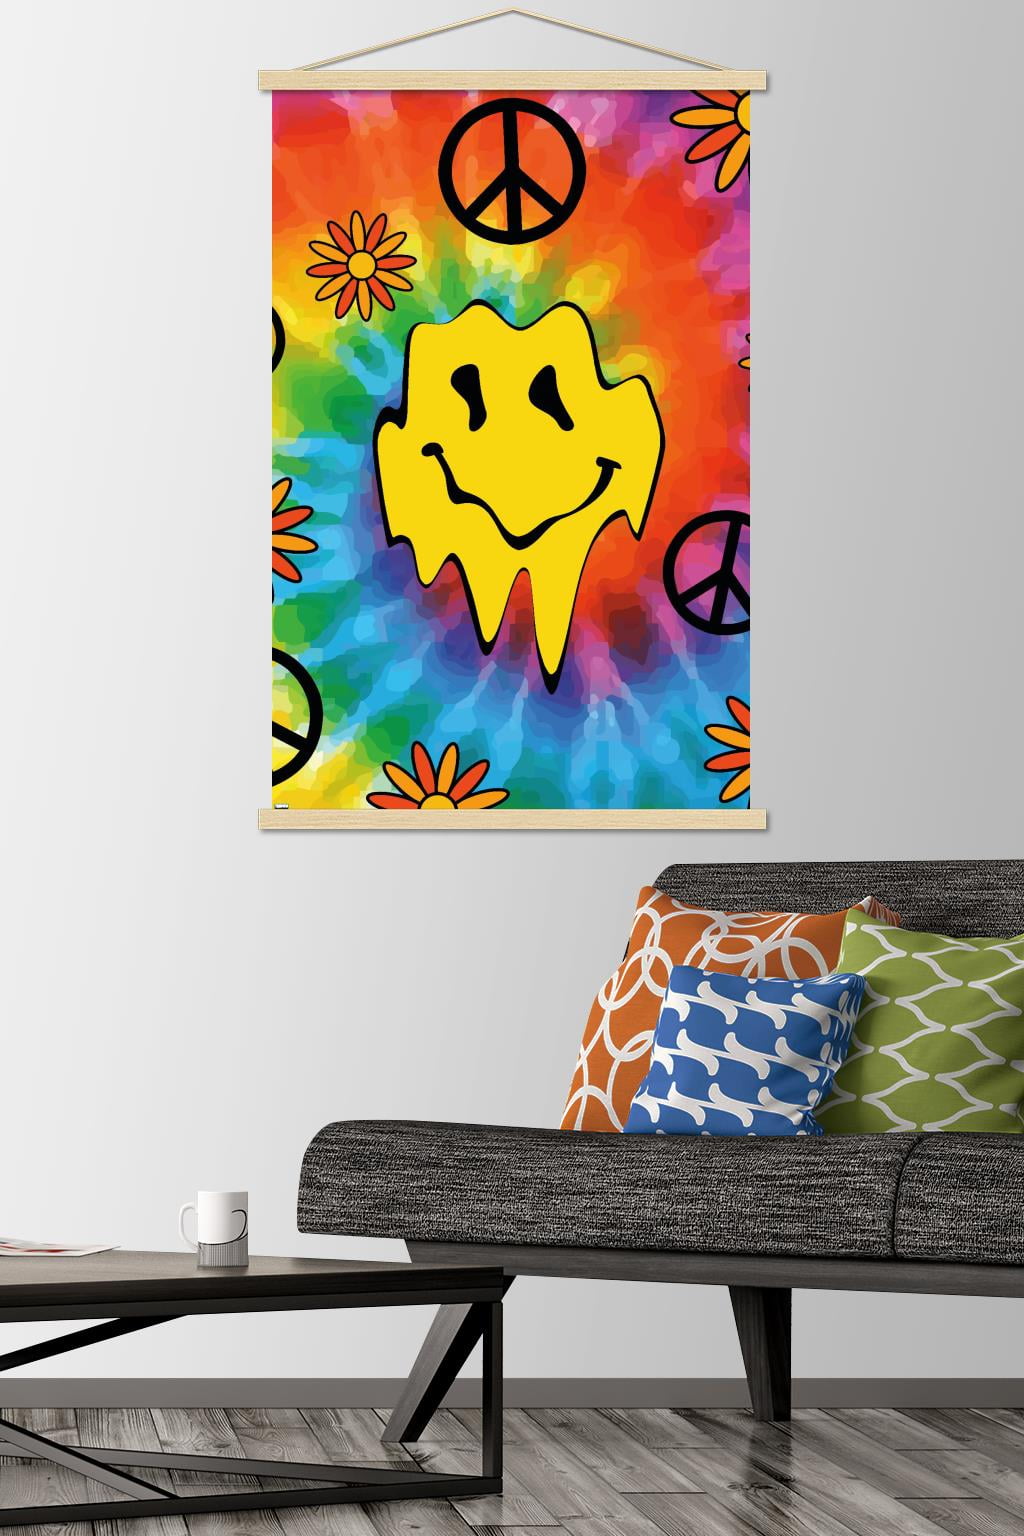 Groovy Melting Smile Face Wall Poster, 22.375